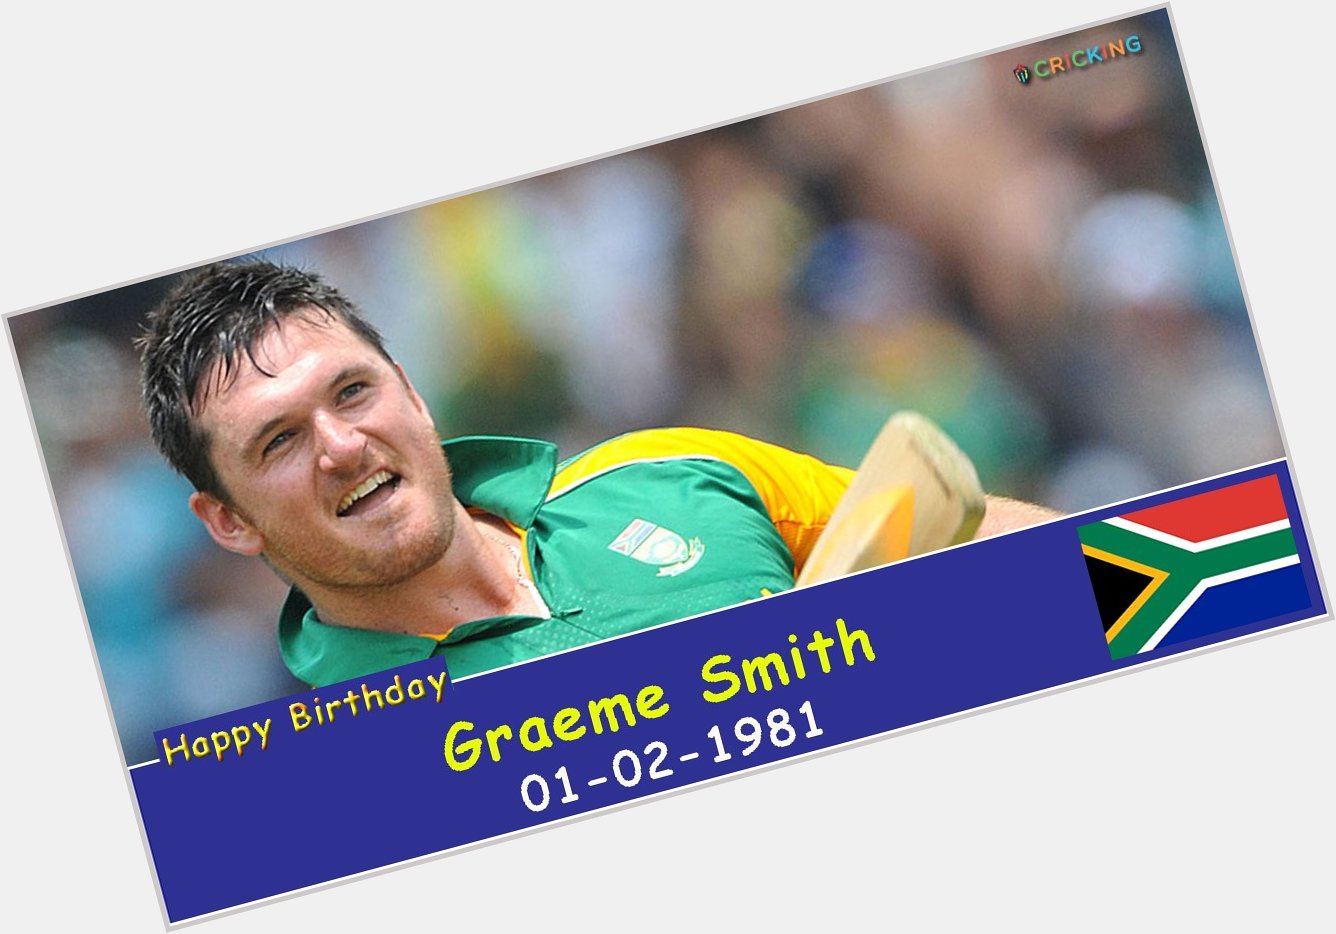 Happy Birthday Graeme Smith. The former South African cricketer turns 36 today. 